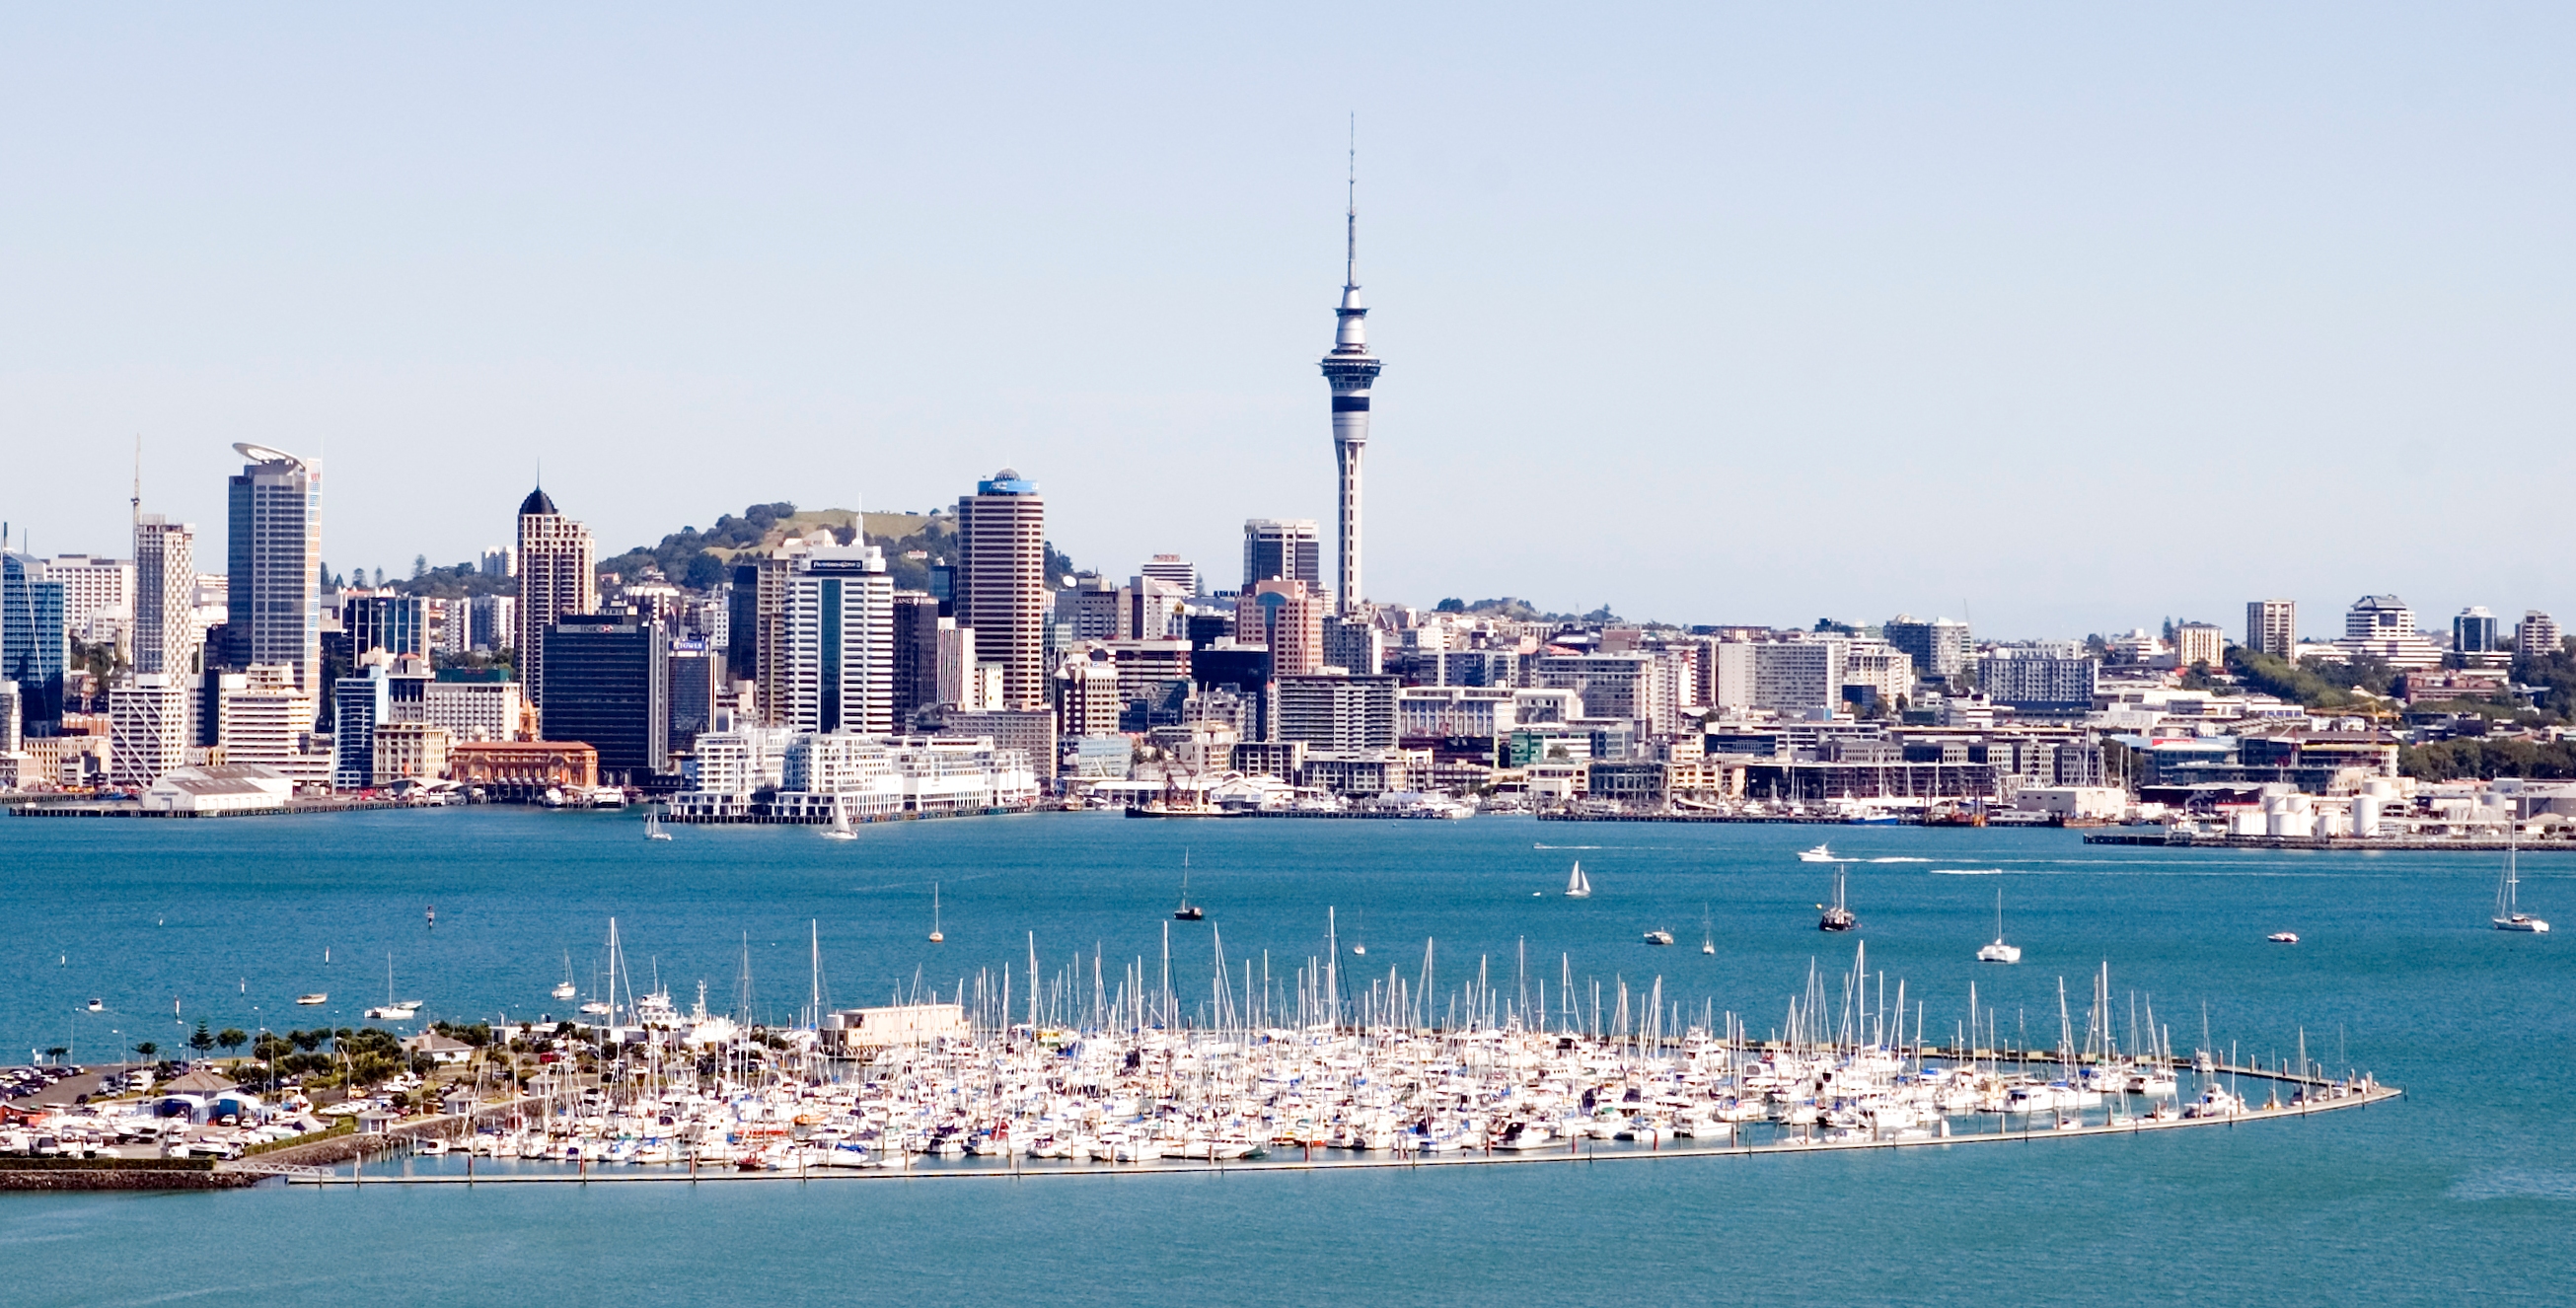 New Zealand Immigration: Visa over stayers reach new low in New Zealand